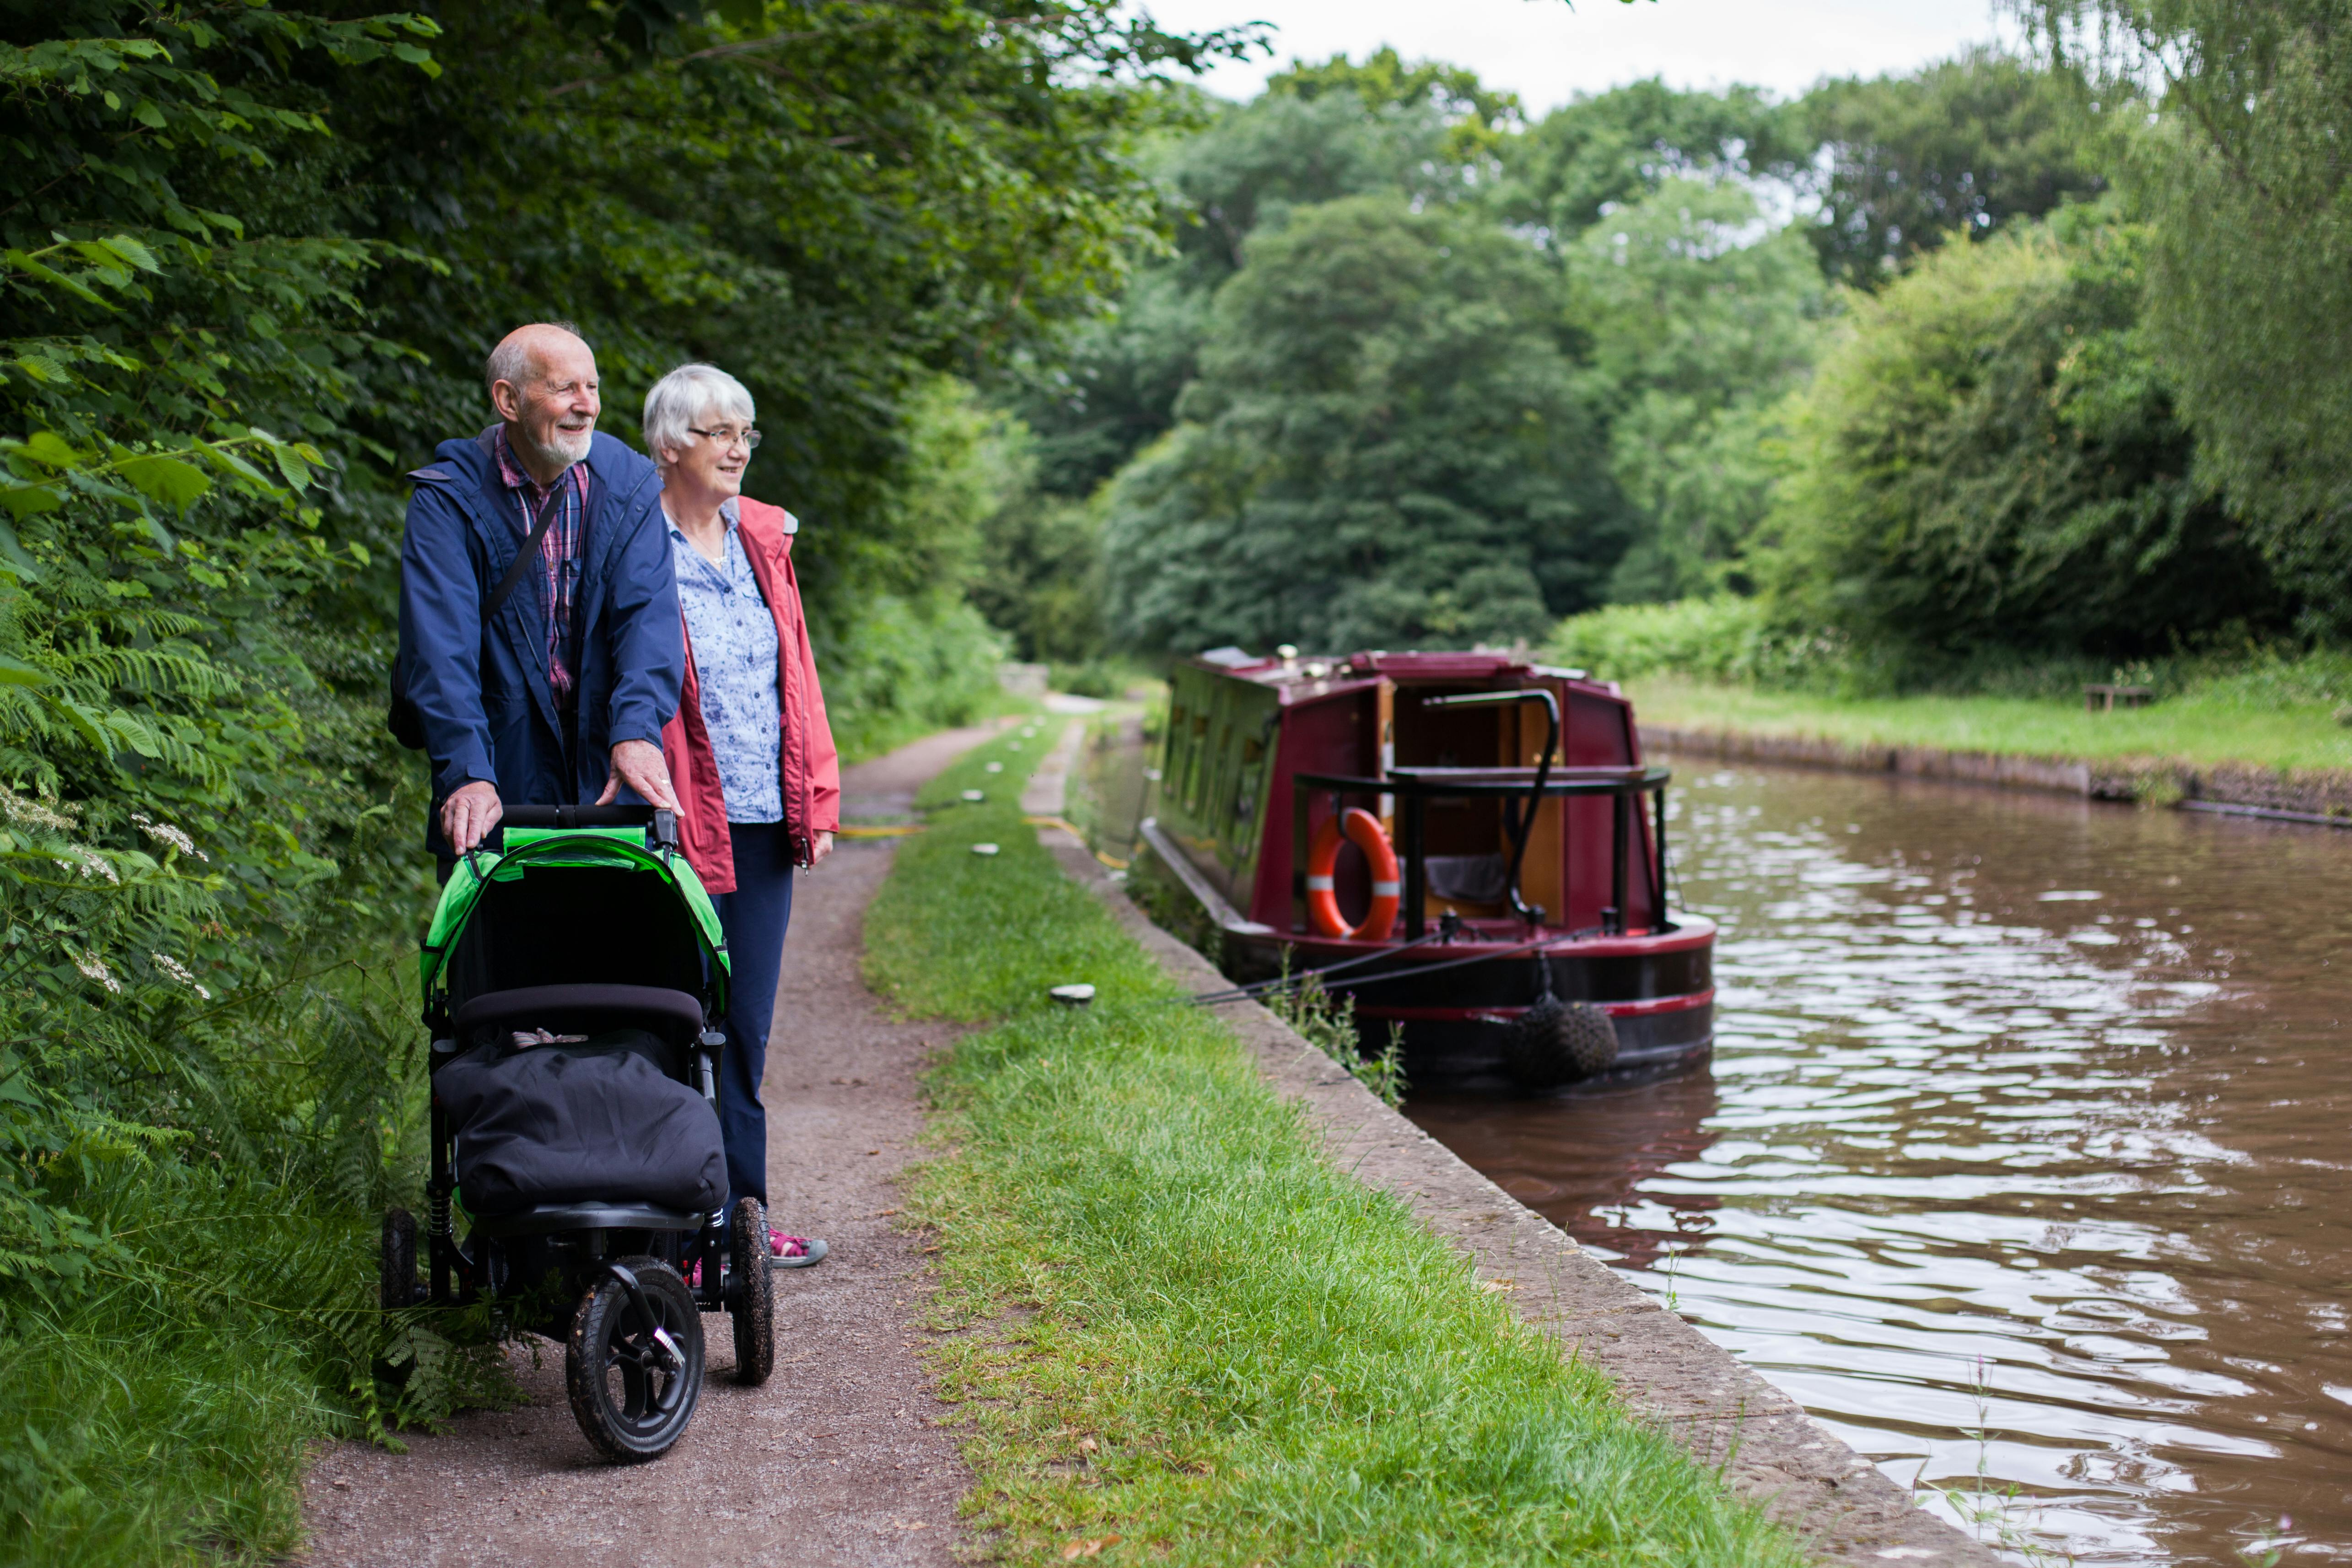 demonstration of access for pushchair walk along canal post-improvements.jpg